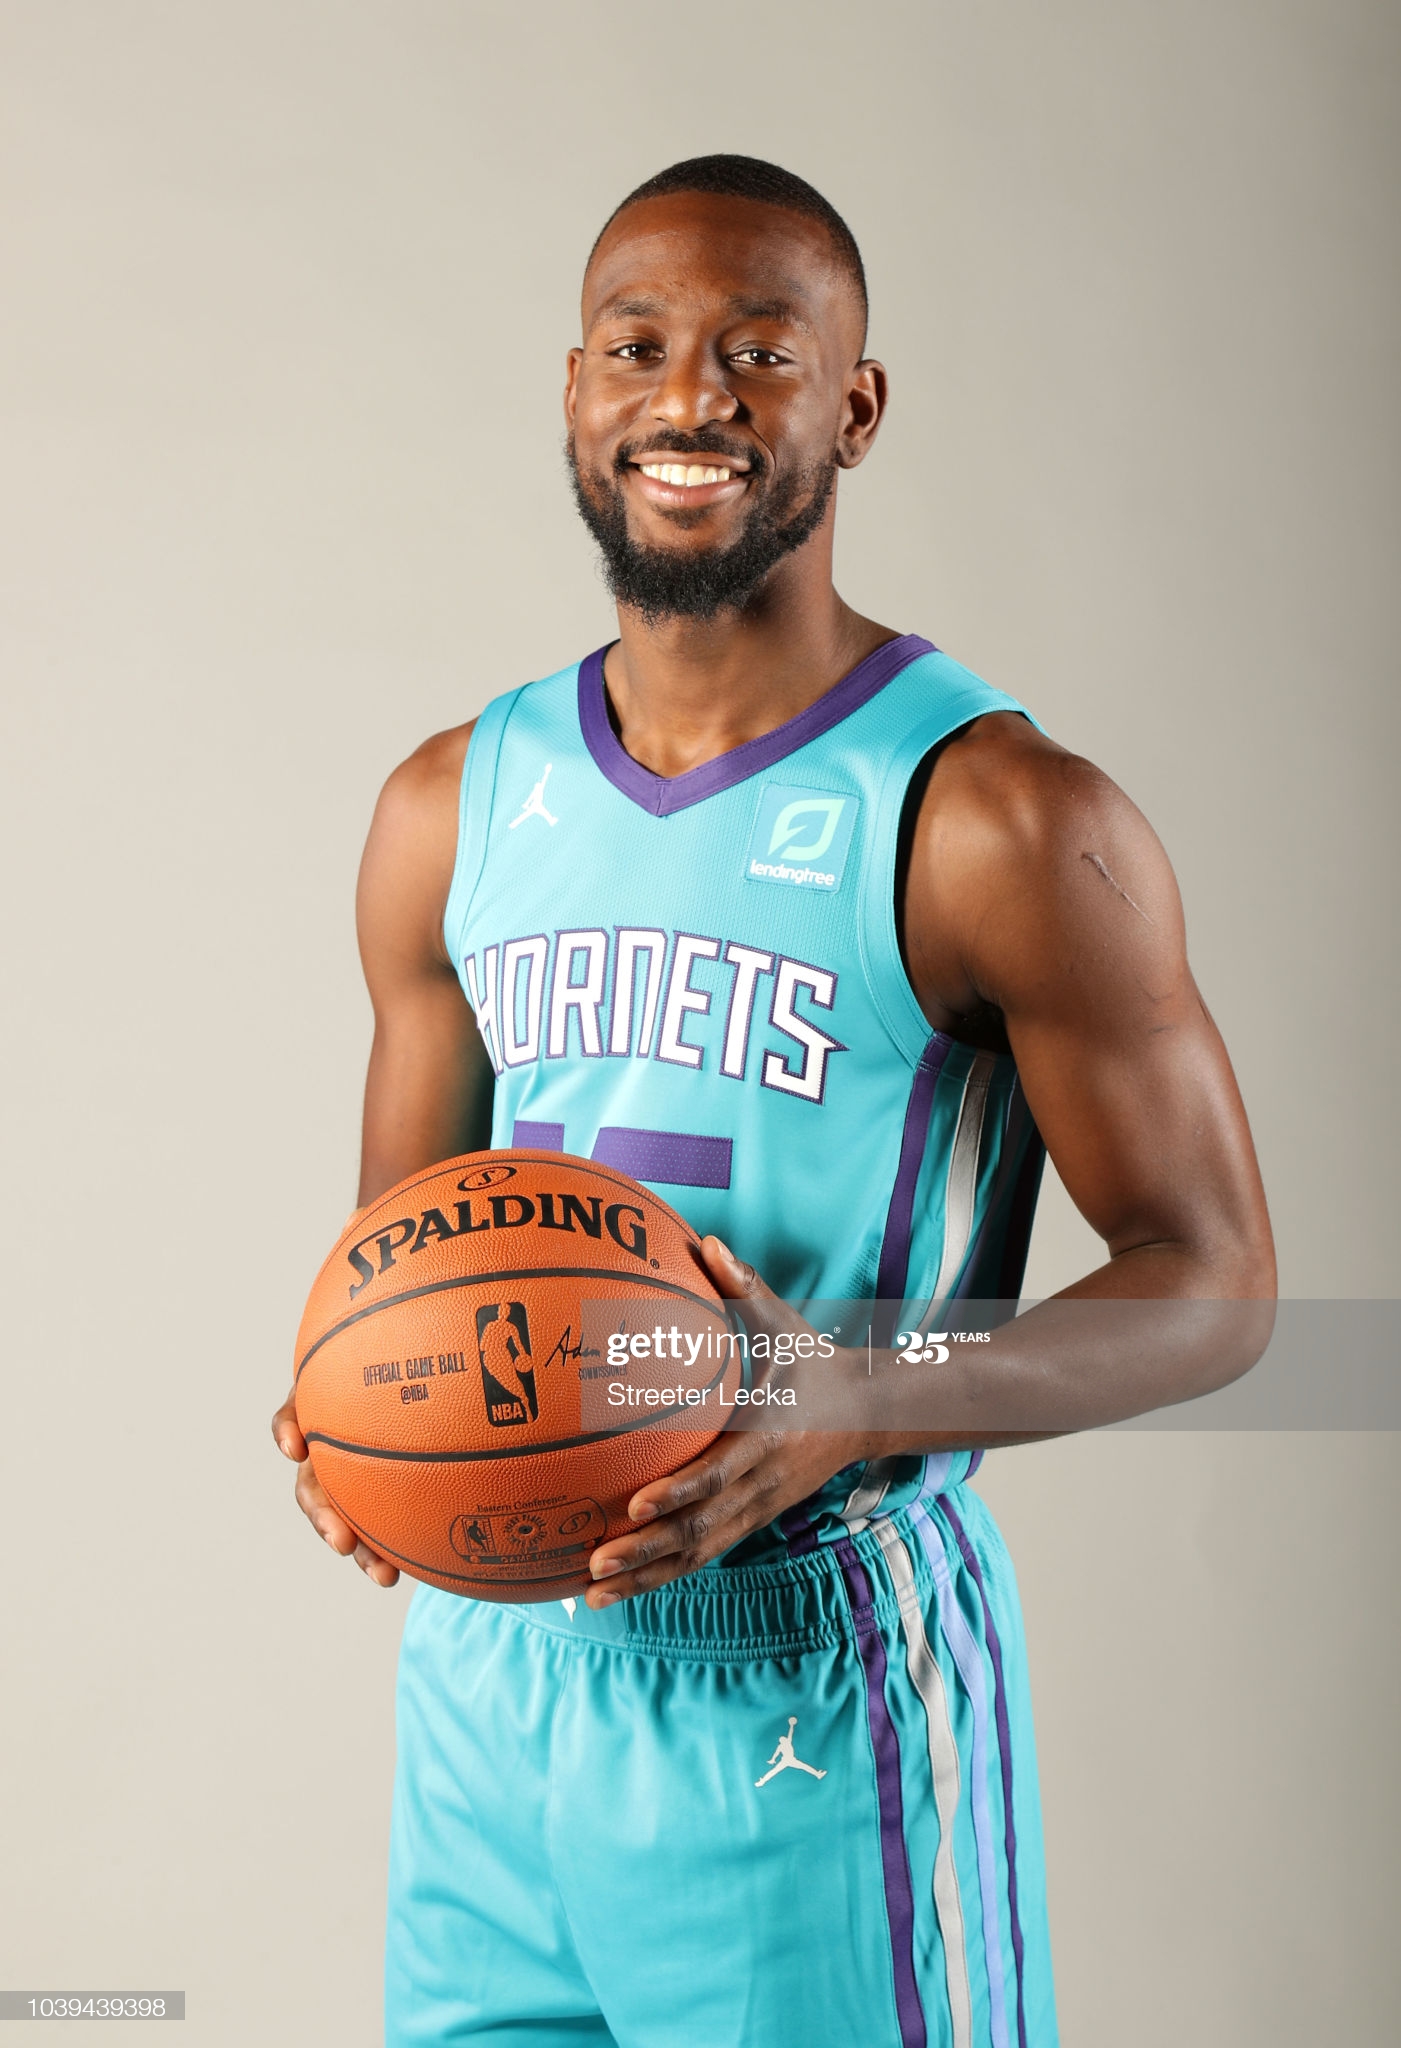 kemba-walker-poses-for-a-portrait-during-the-charlotte-hornets-media-picture-id1039439398.jpg